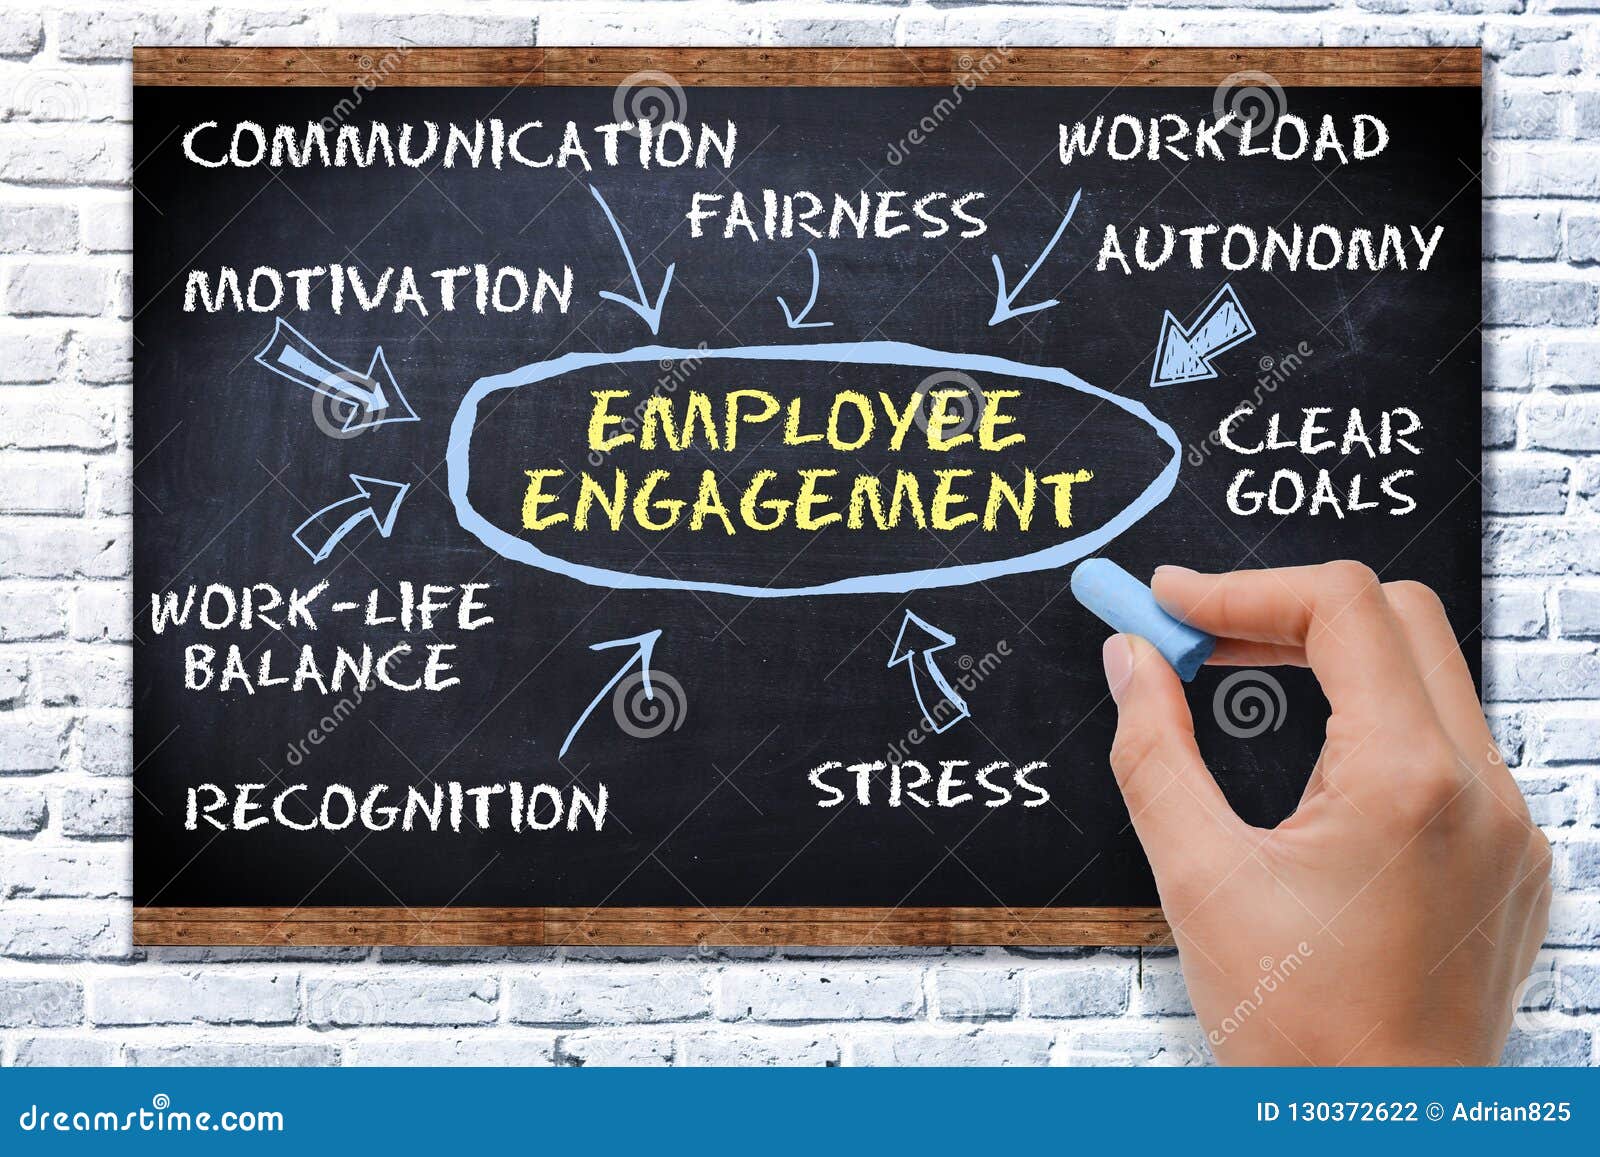 employee engagement concept with text on blackboard